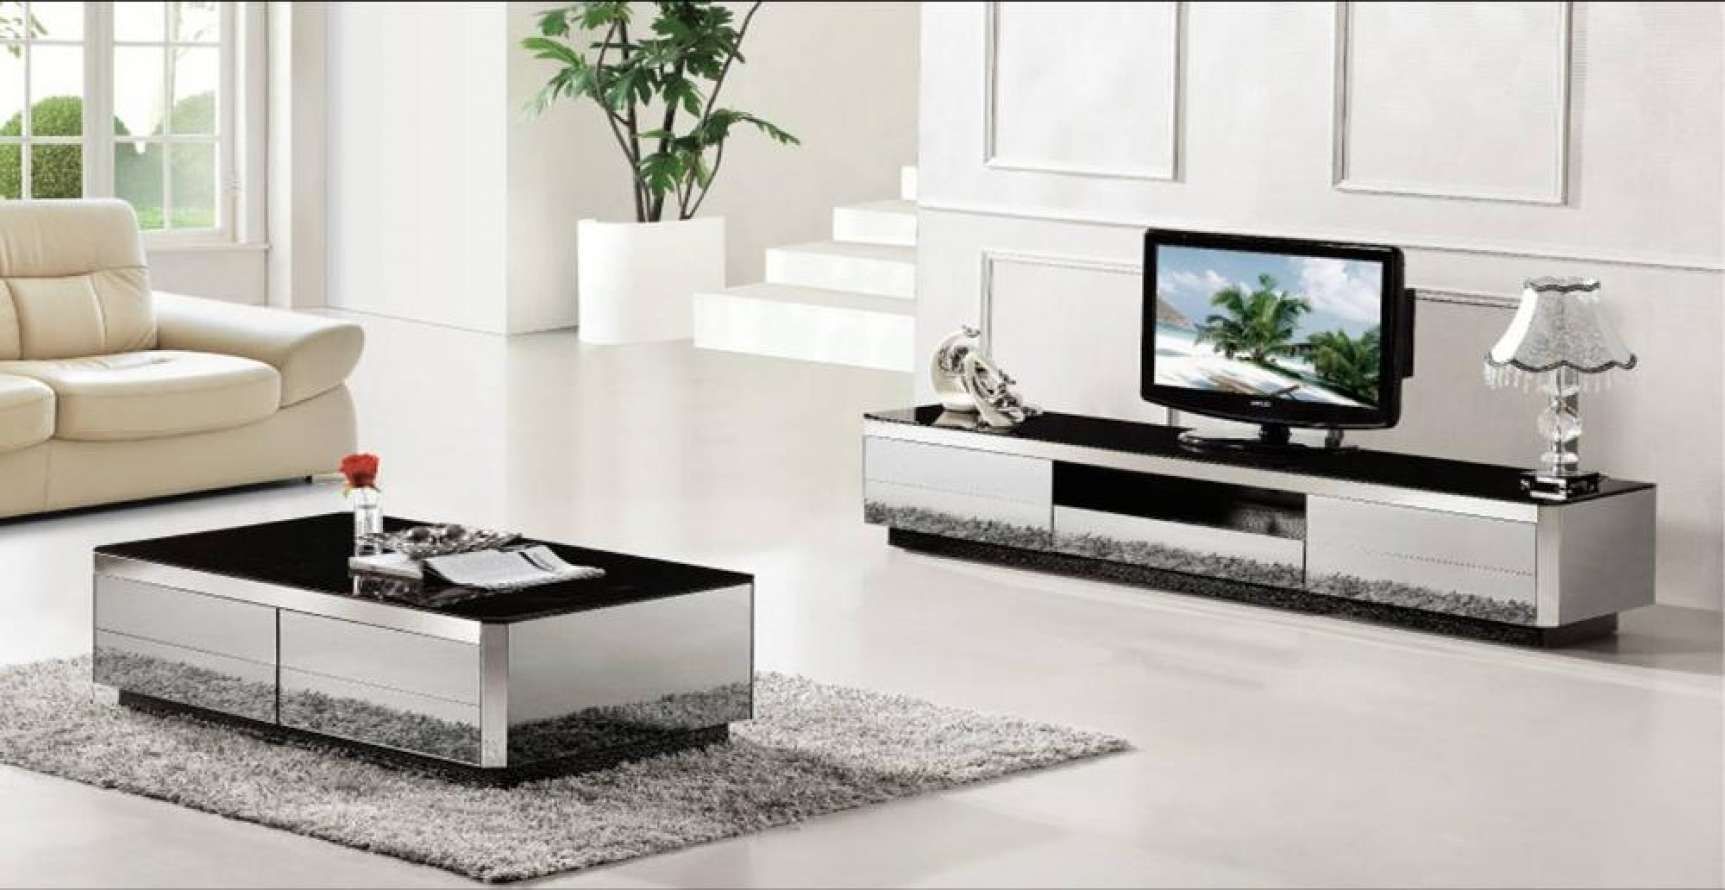 Coffee Table : Wonderful Matching Tv Unit And Side Table Side With Regard To Favorite Coffee Table And Tv Unit Sets (View 1 of 20)